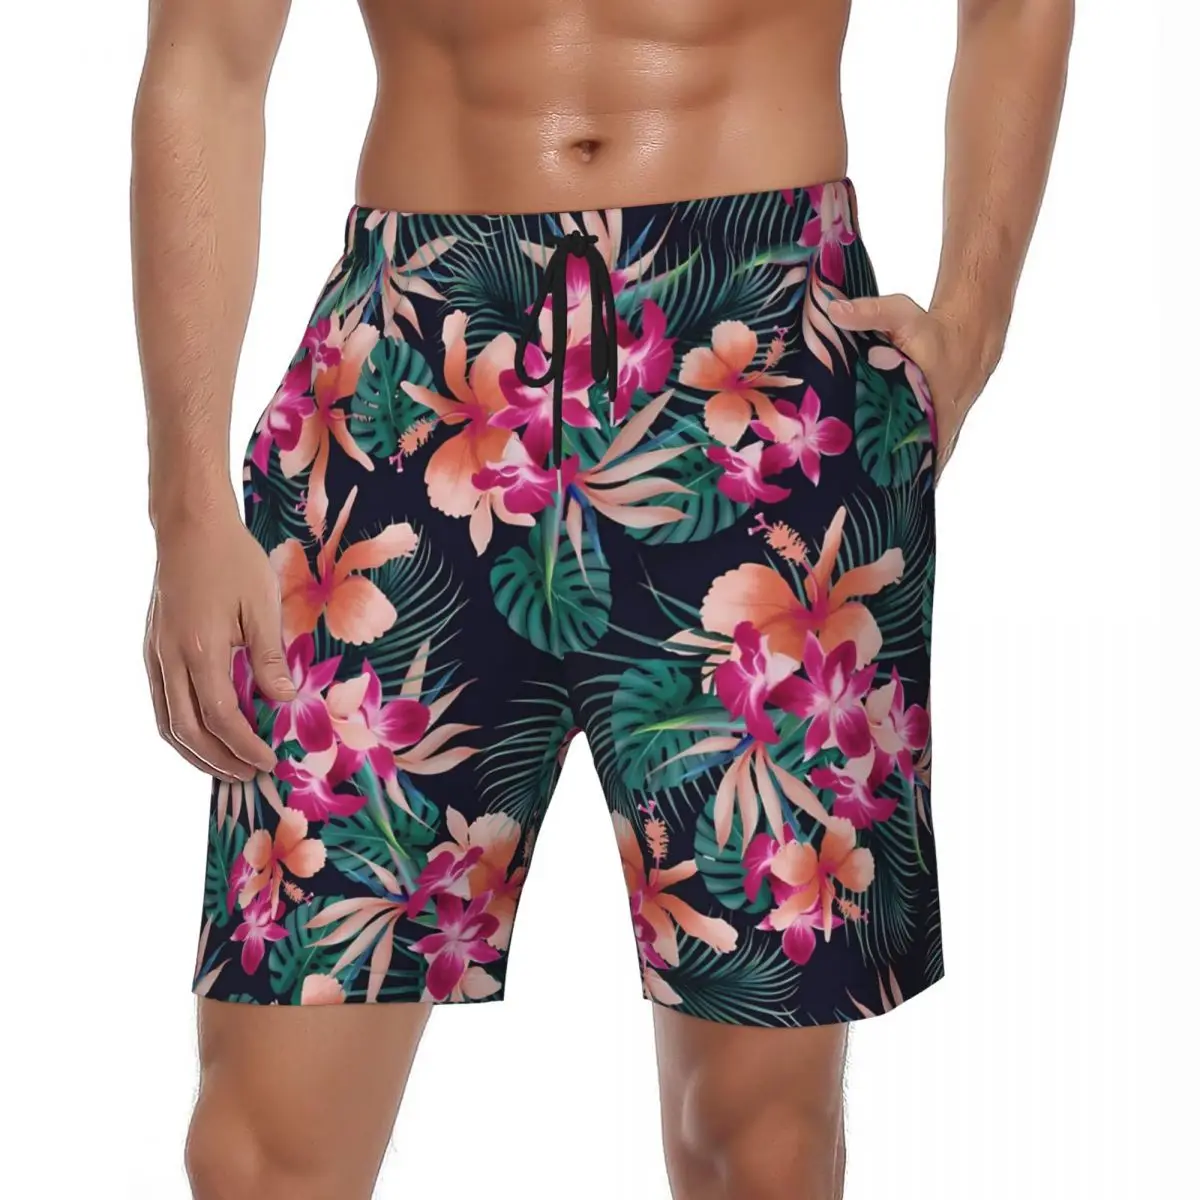 

Tropical Hawaii Gym Shorts Summer Flowers Sportswear Board Short Pants Men's Breathable Classic Printed Plus Size Beach Trunks